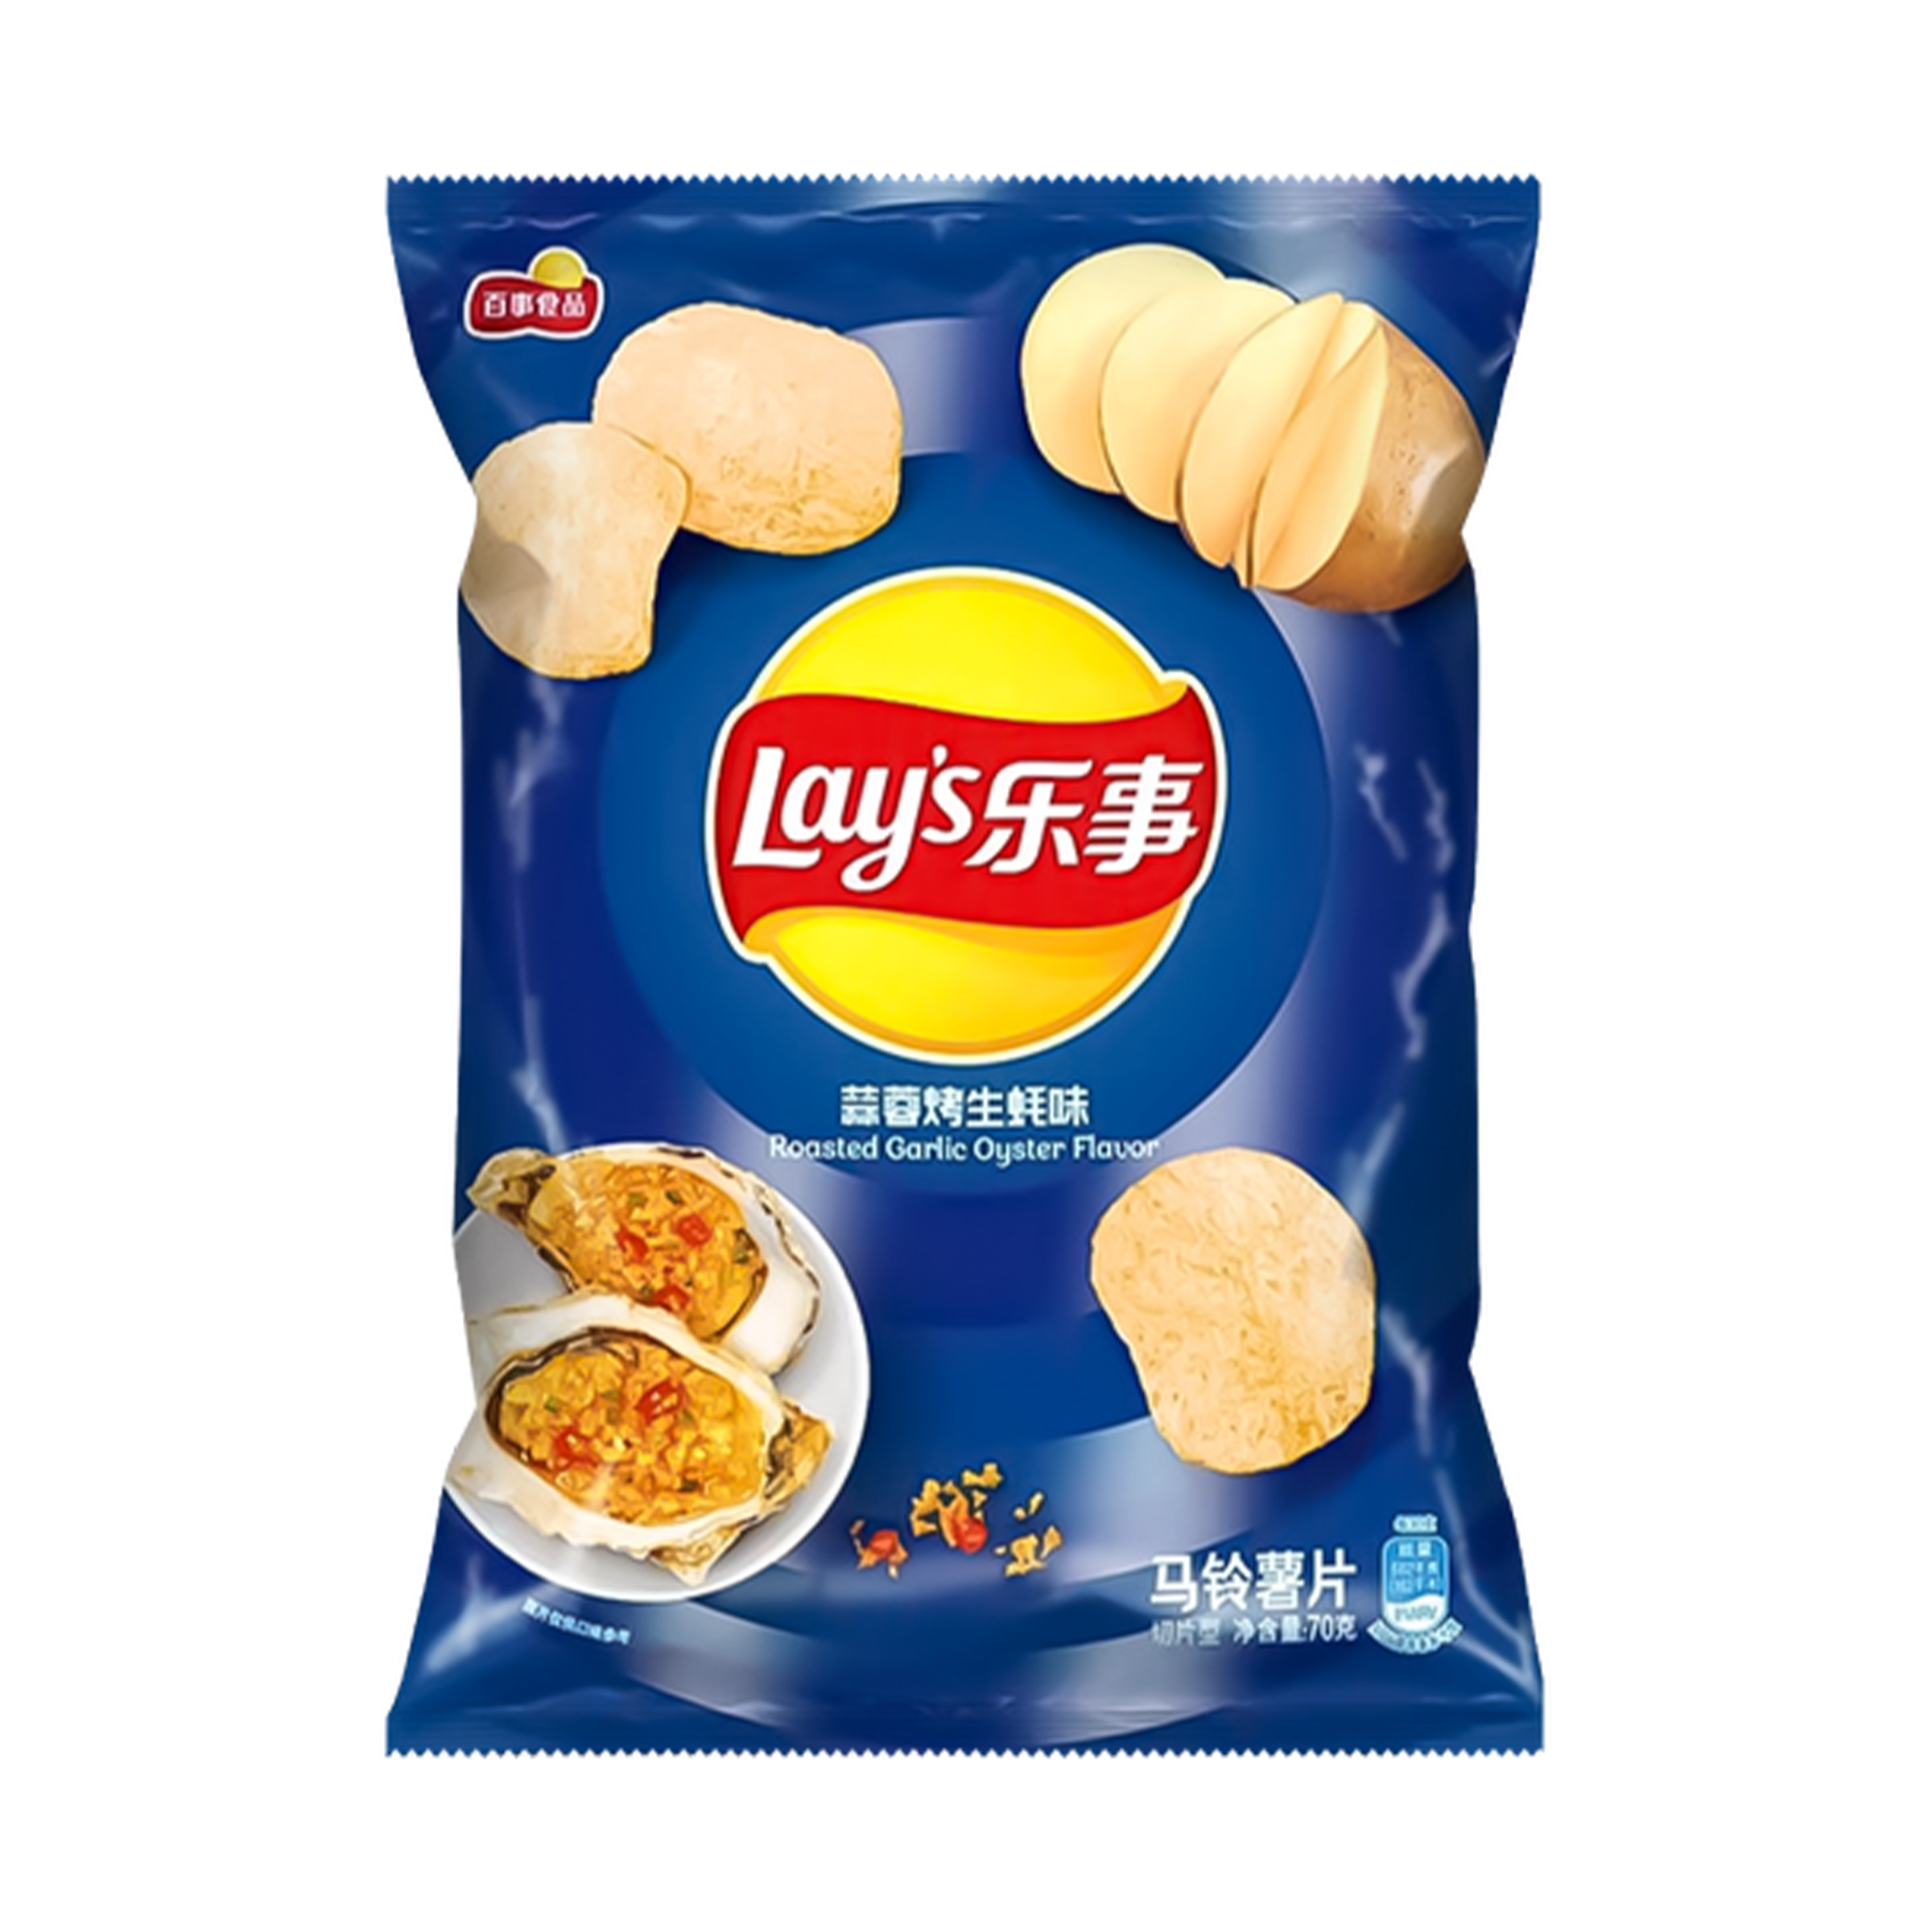 Lays - Roasted Garlic Oyster - Asia